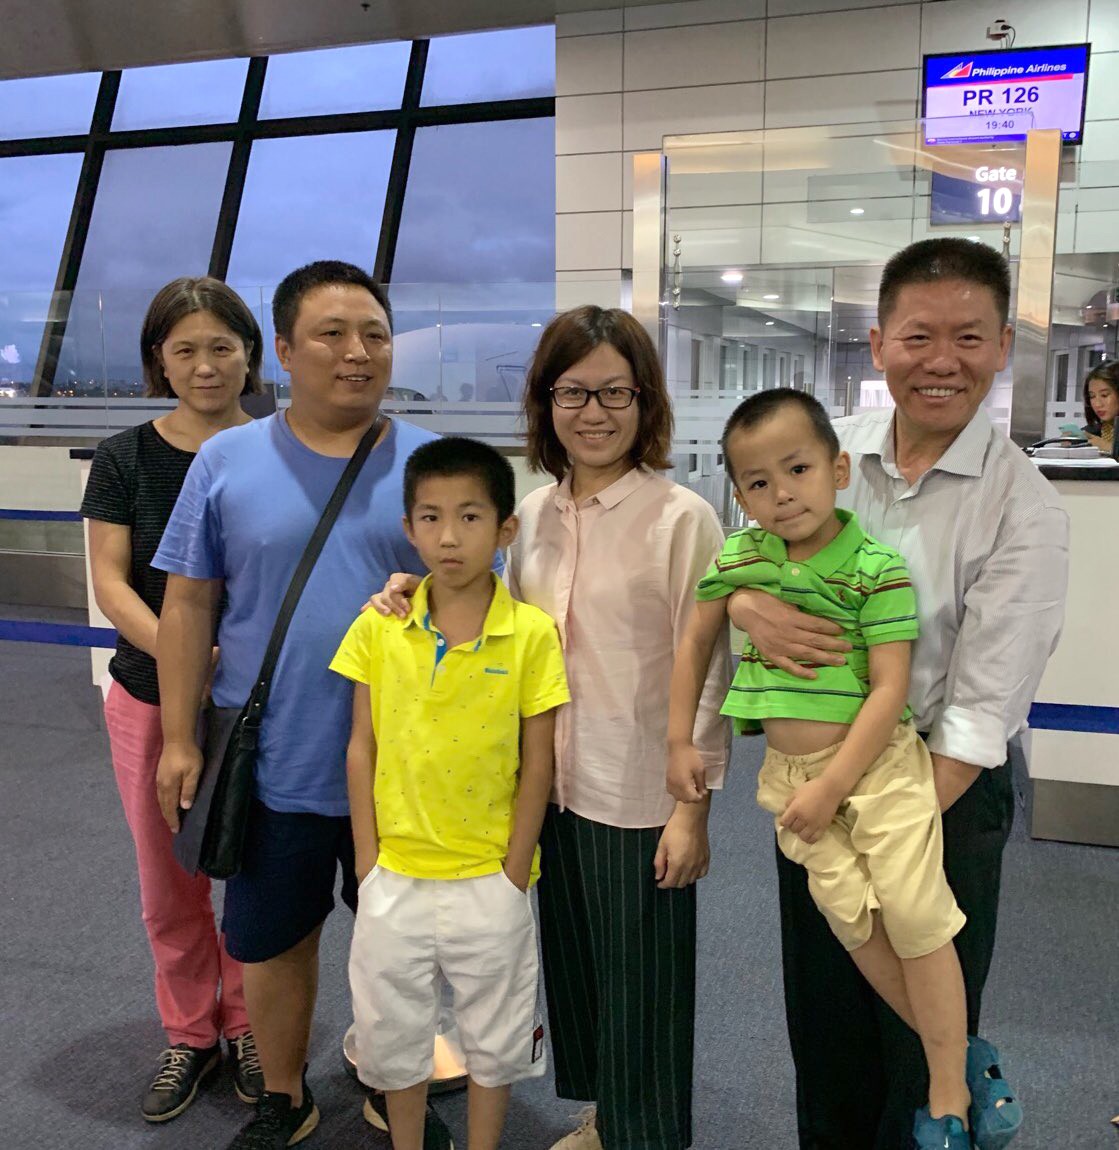 Lawyer Chen Jiangang (second from left) and his family have fled China for the United States. Photo: Twitter